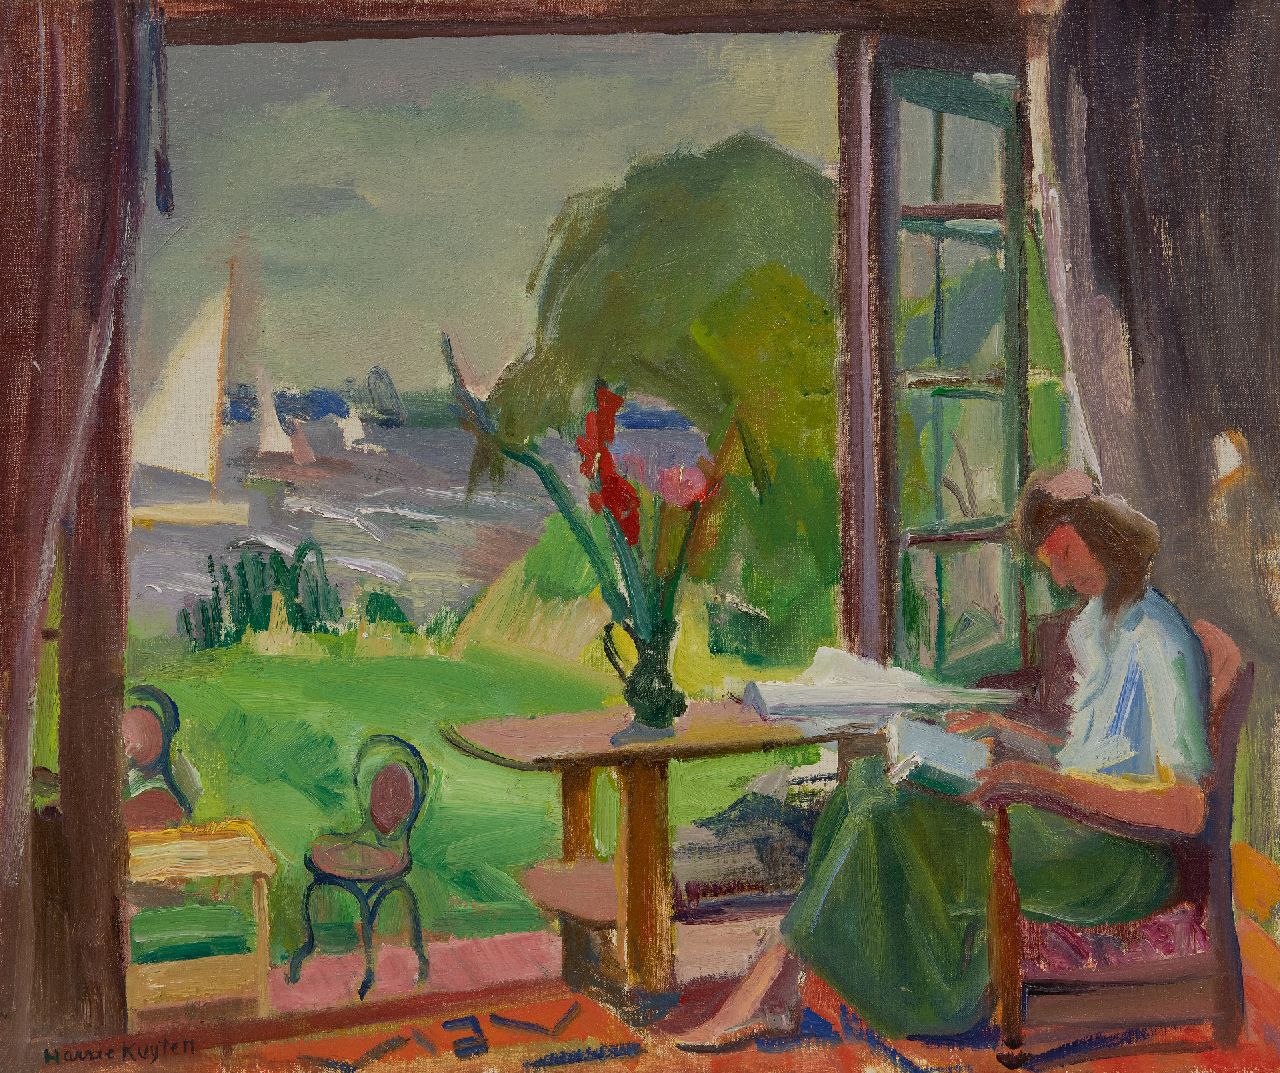 Kuijten H.J.  | Henricus Johannes 'Harrie' Kuijten | Paintings offered for sale | House at the Bergse Plas in Rotterdam, oil on canvas 50.0 x 60.0 cm, signed l.l. and painted ca. 1948